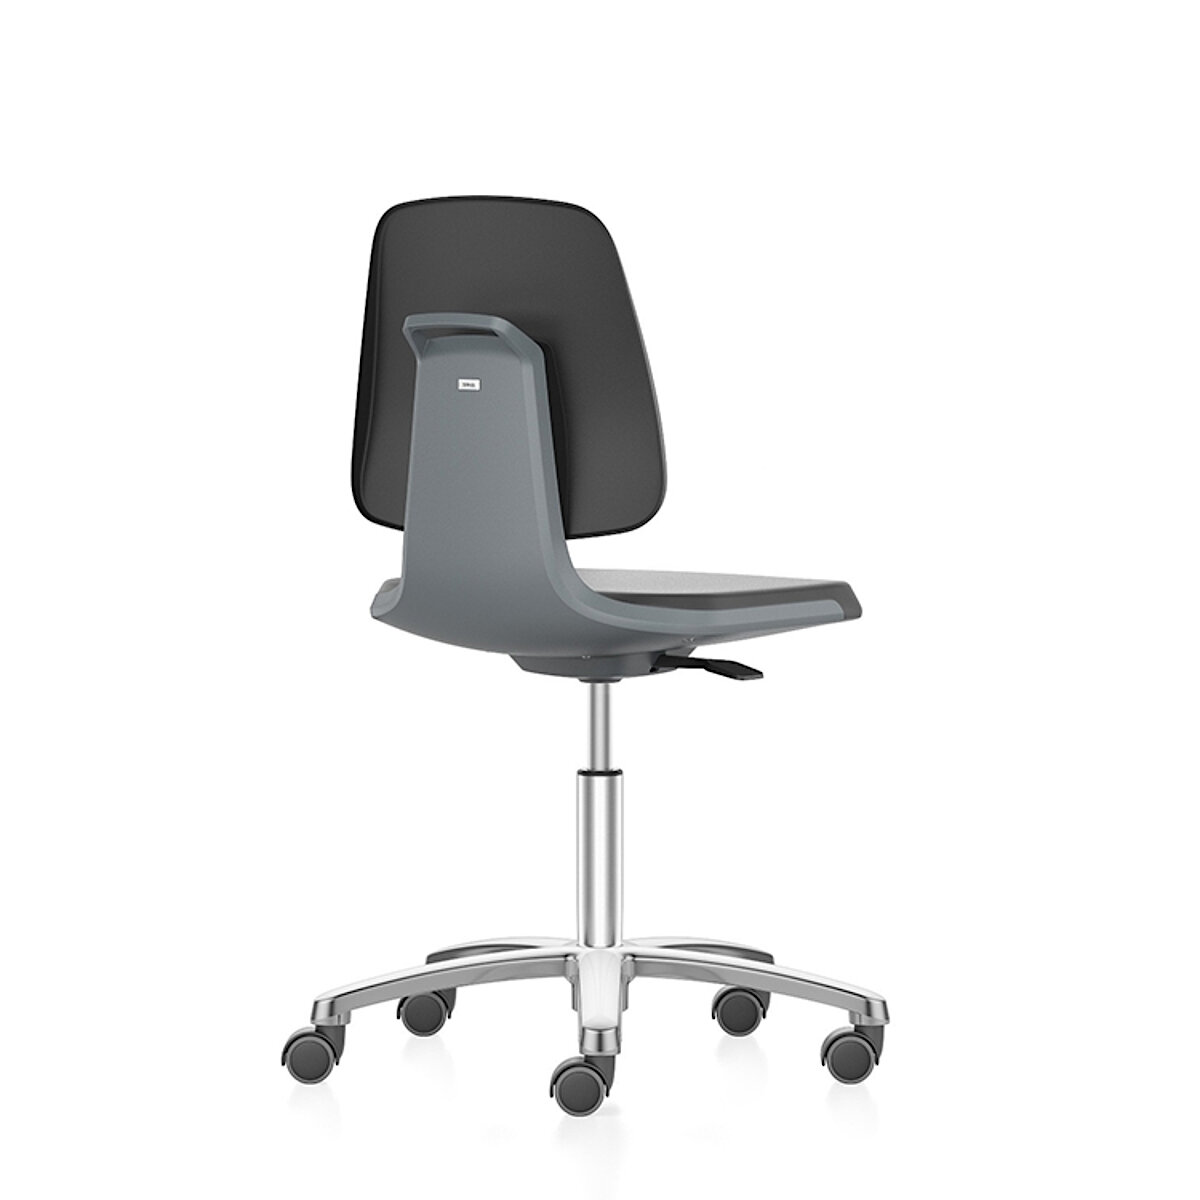 Cleanroom laboratory swivel chair ESD, low with castors